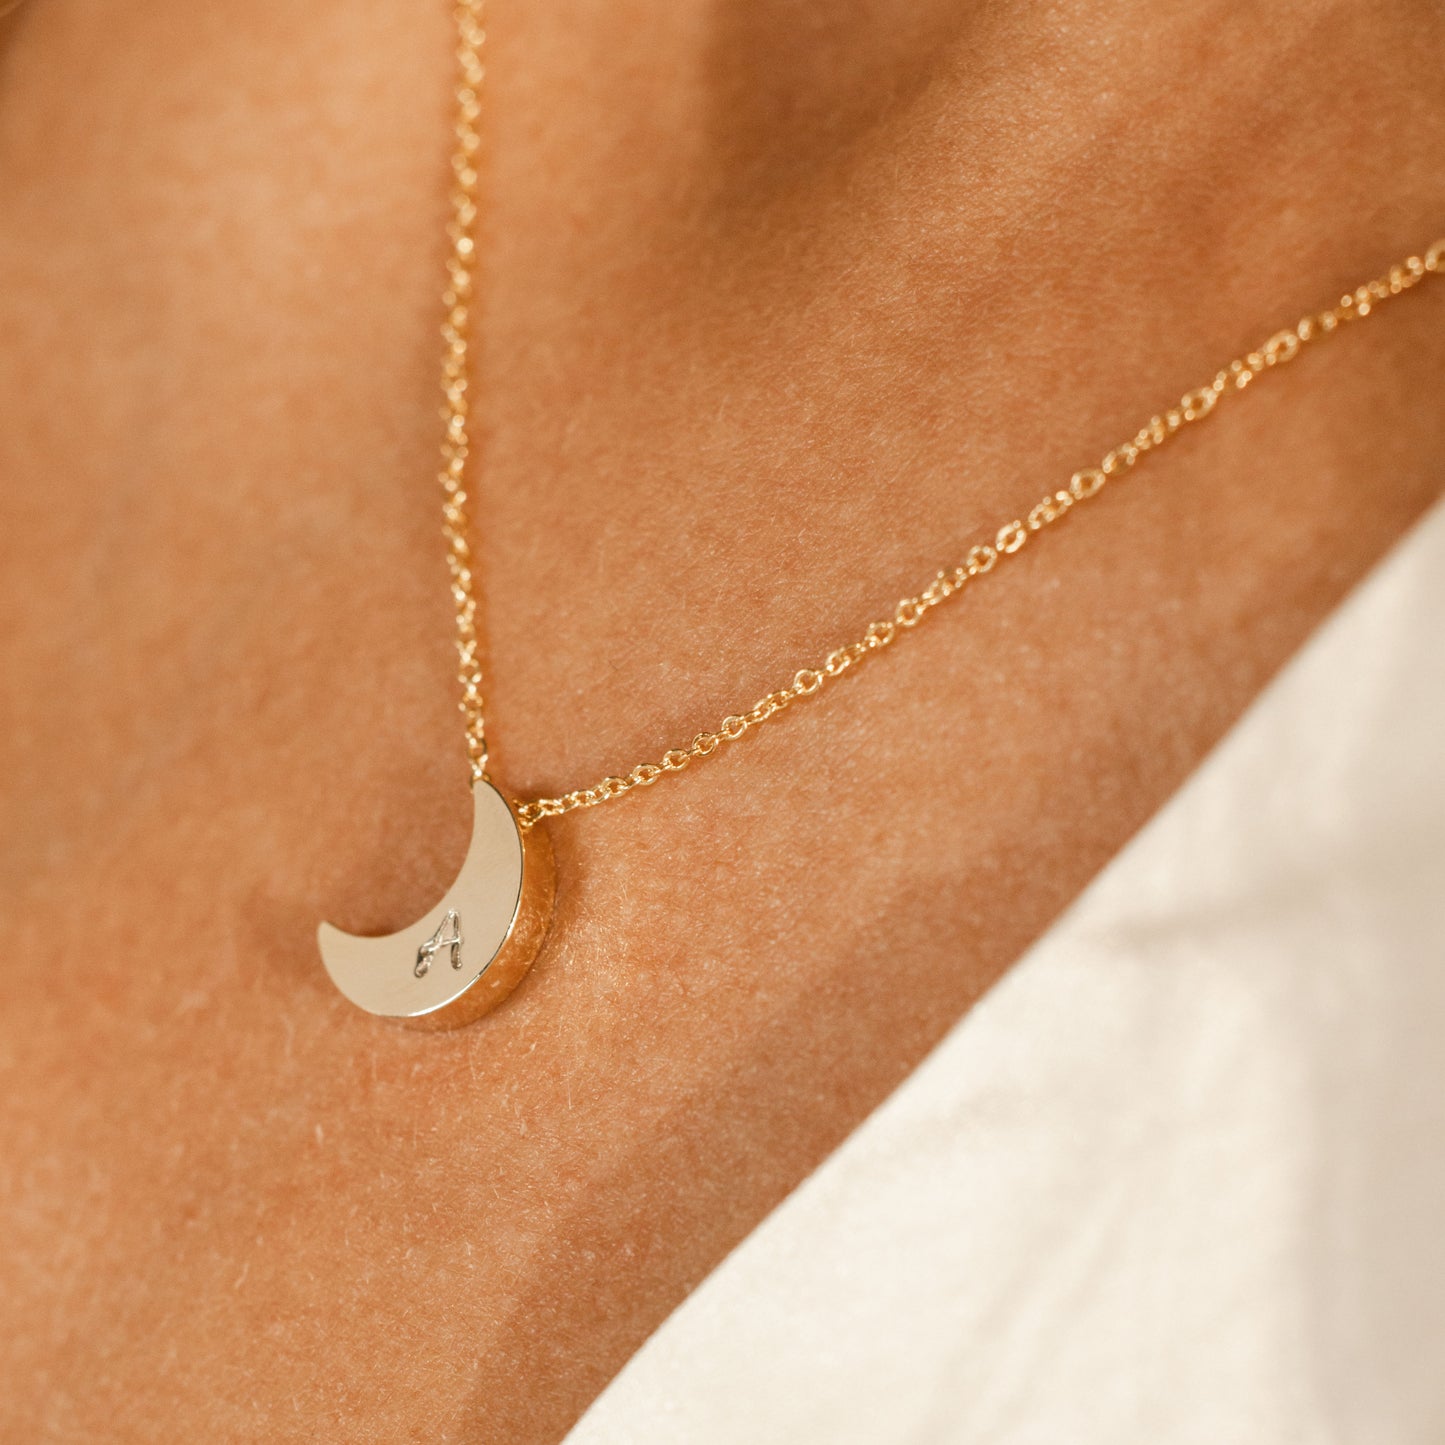 Gold Moon Necklace - Personalized your initial with hand-stamped